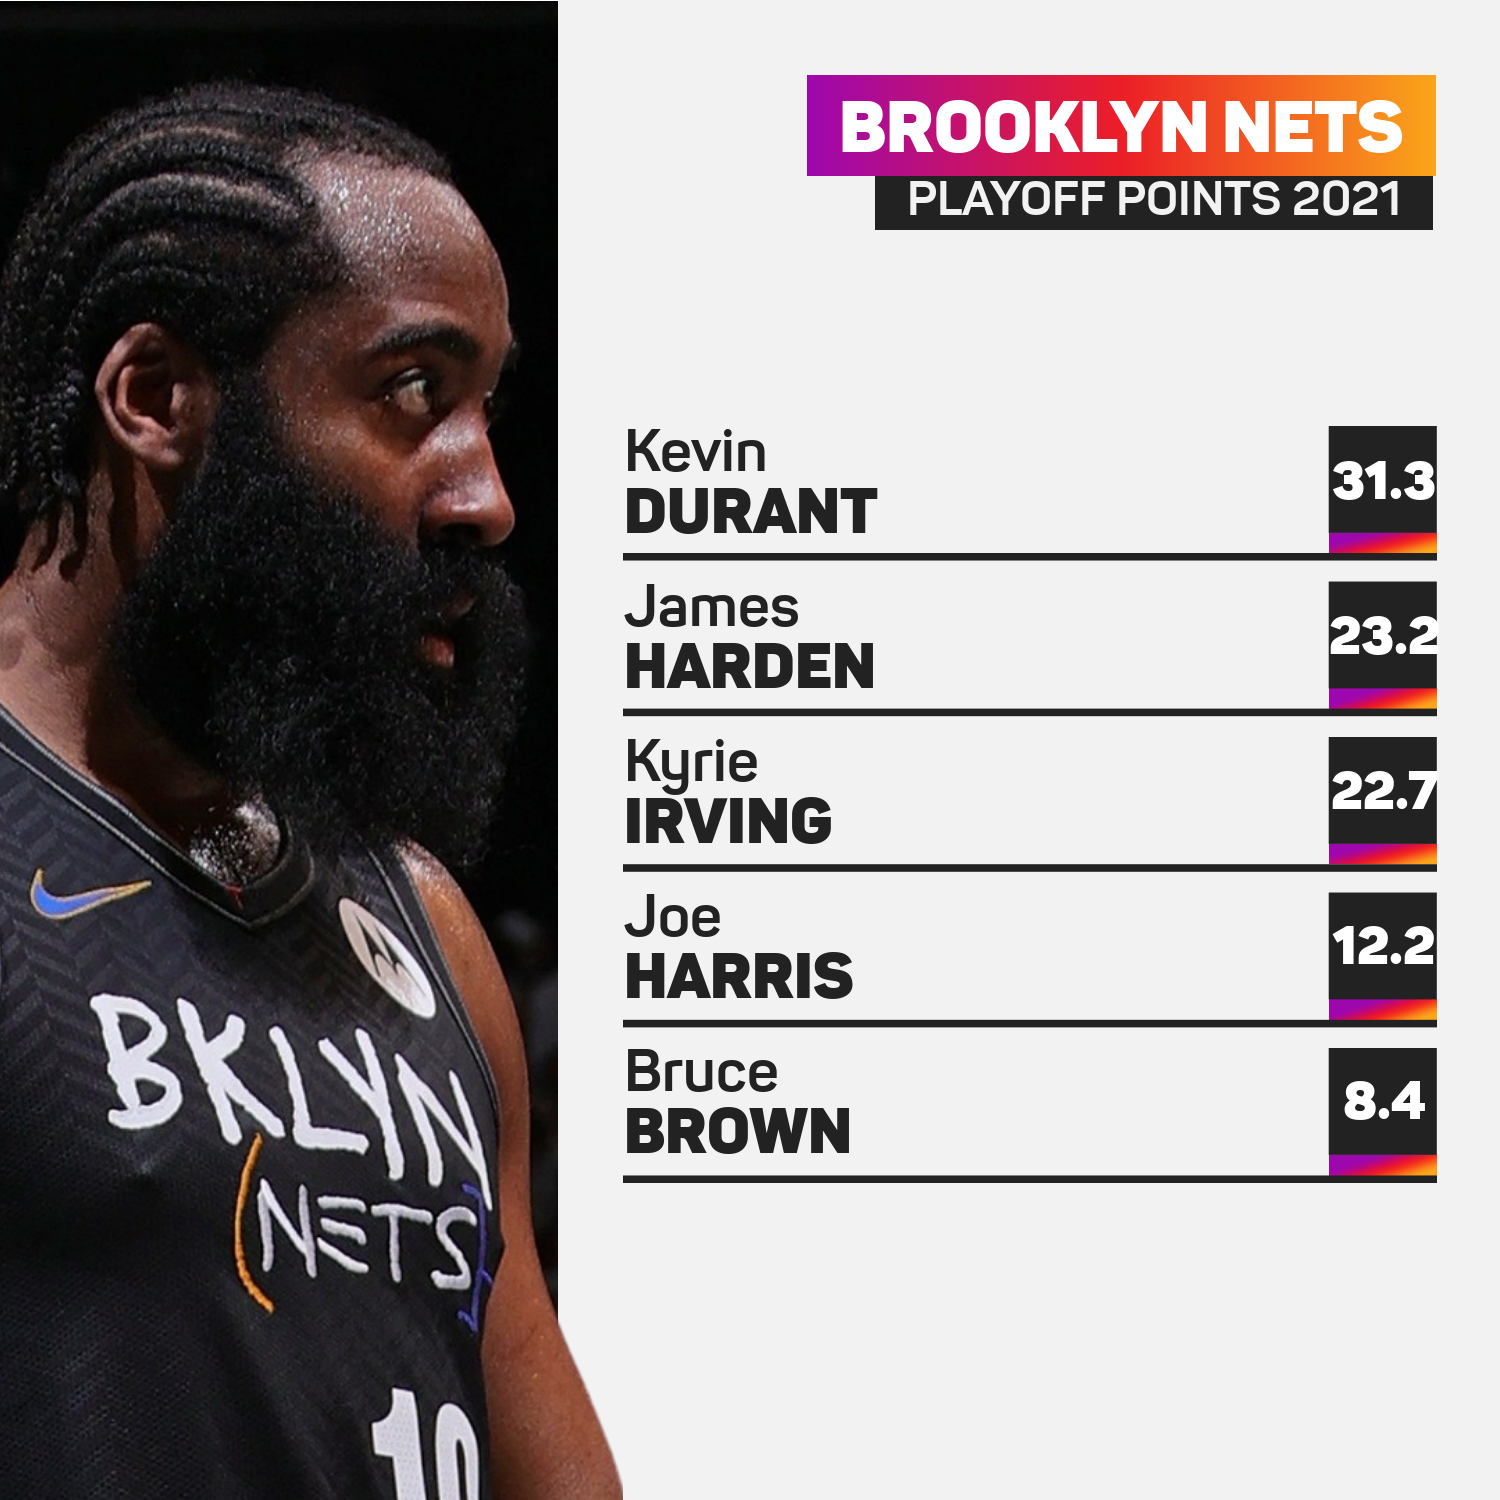 James Harden ranks second for the Nets in the playoffs